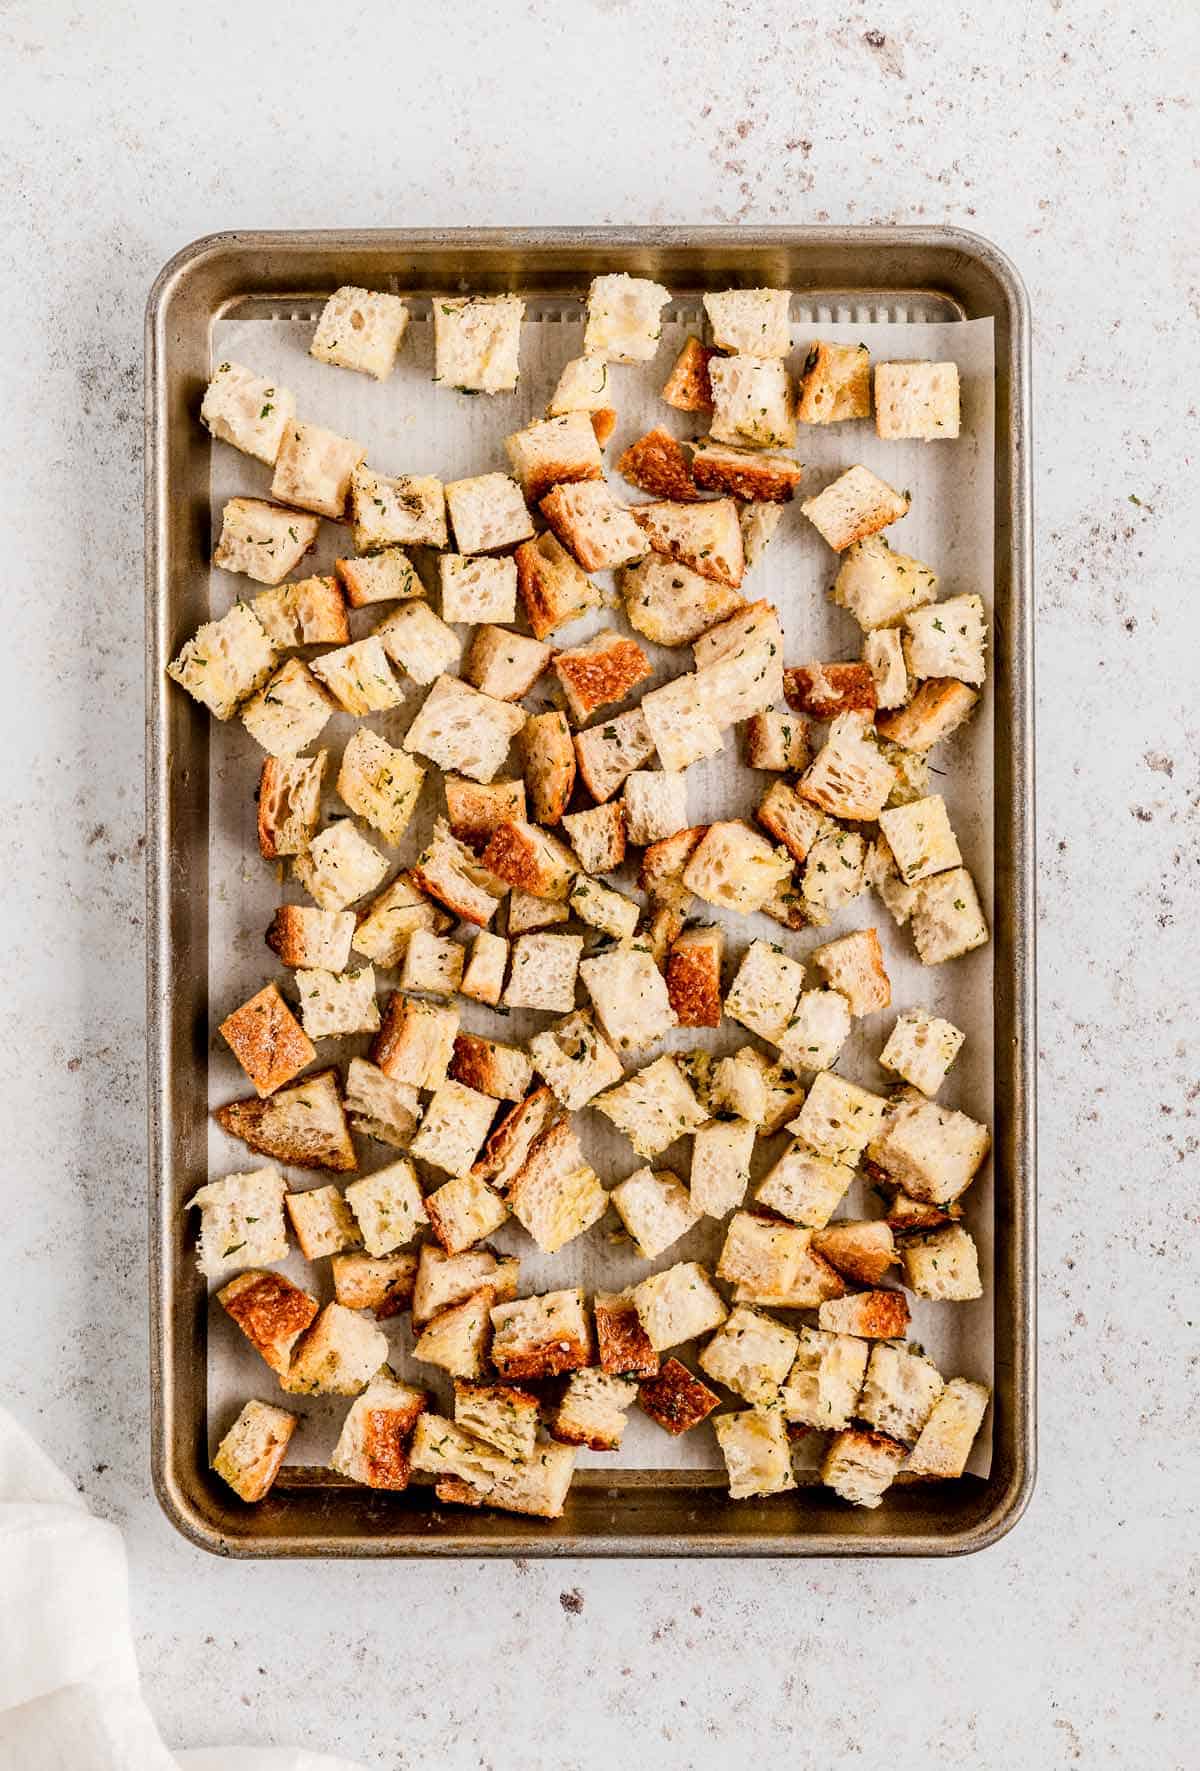 Uncooked croutons on a baking sheet.